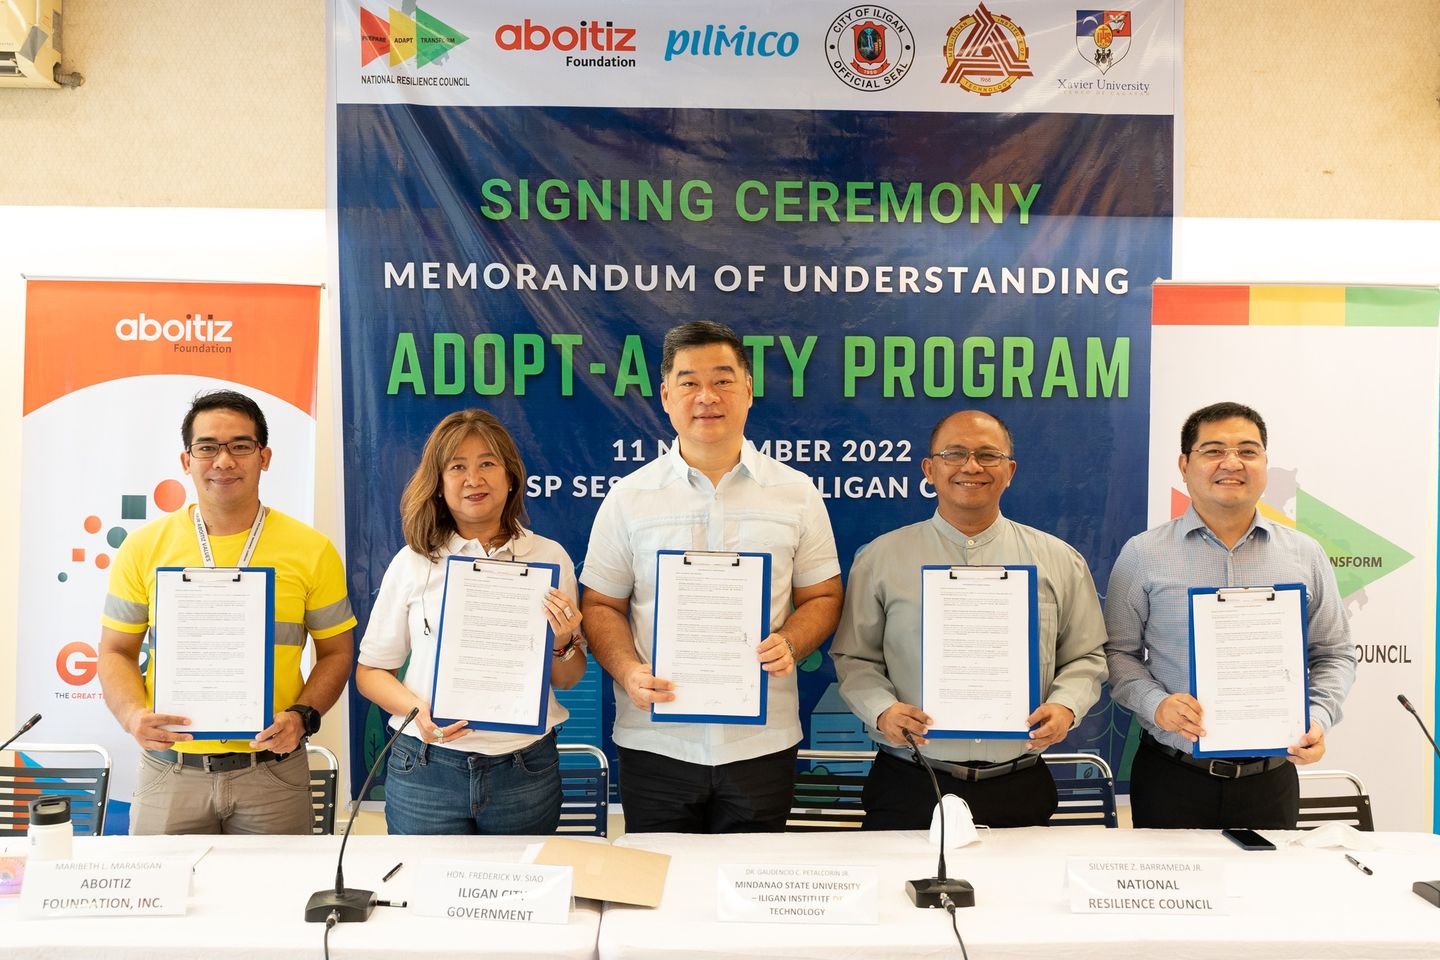 Iligan joins Model Resilient Cities through Aboitiz Foundation and National Resilience Council’s Adopt-a-City partnership